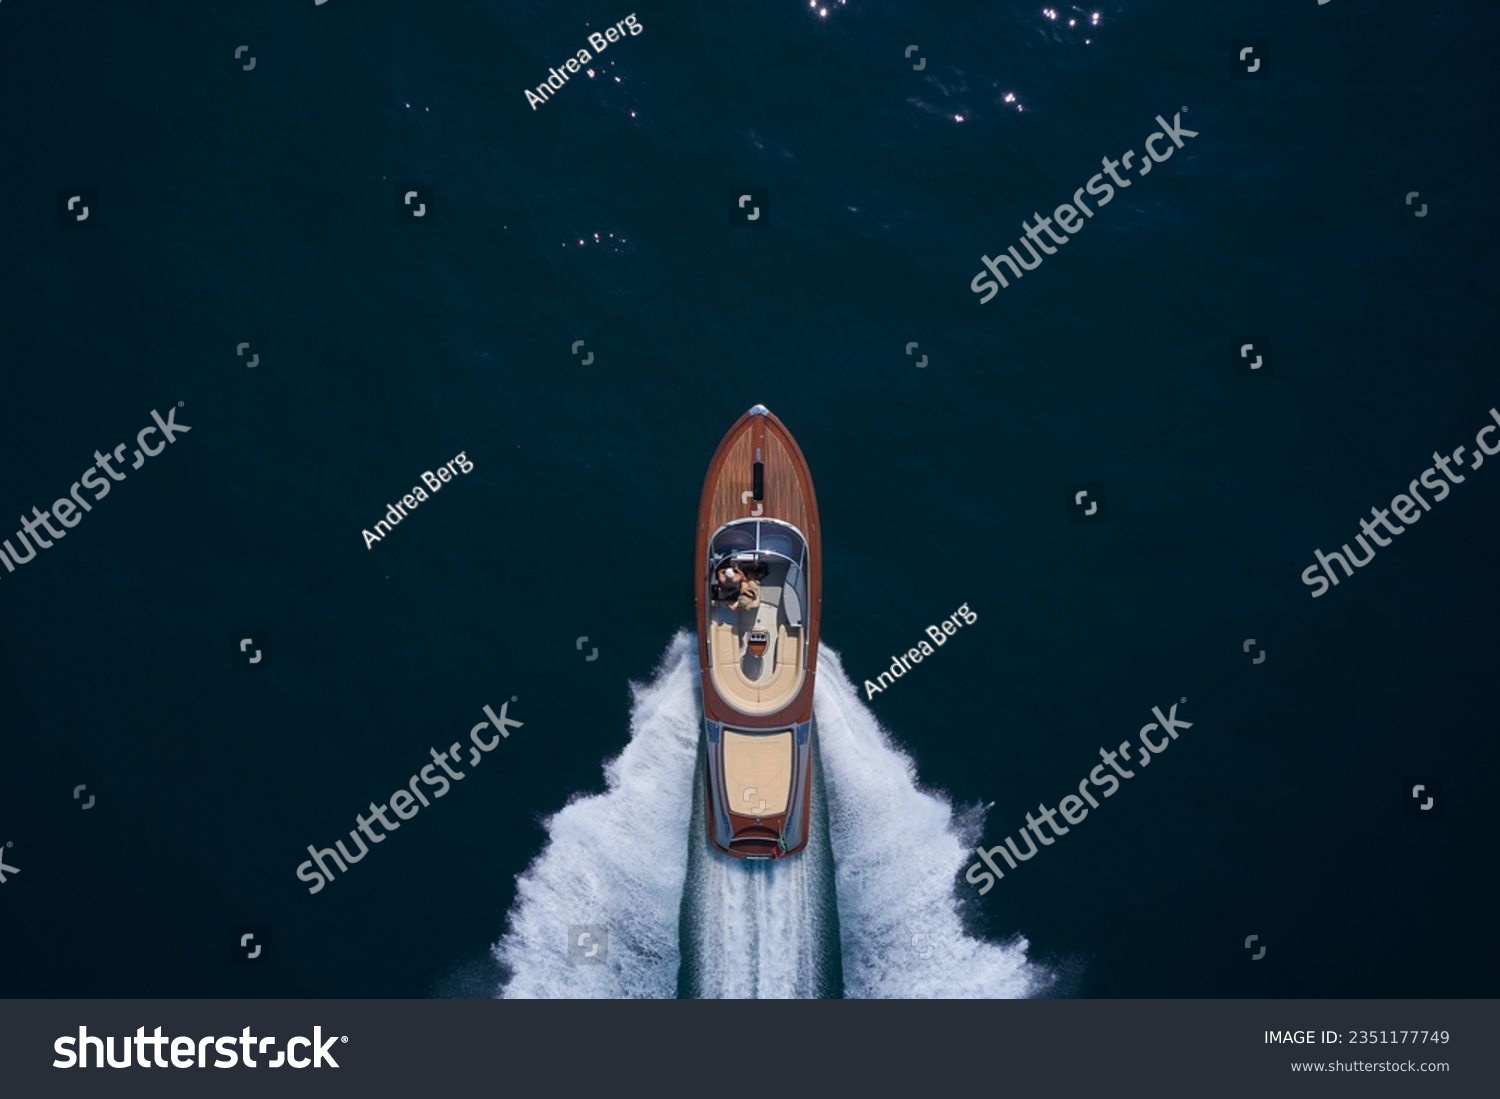 Top view of a wooden powerful motor boat. Luxurious wooden boat fast movement on dark water.Man and woman in luxury expensive wooden speedboat fast moving on dark water top view. #2351177749